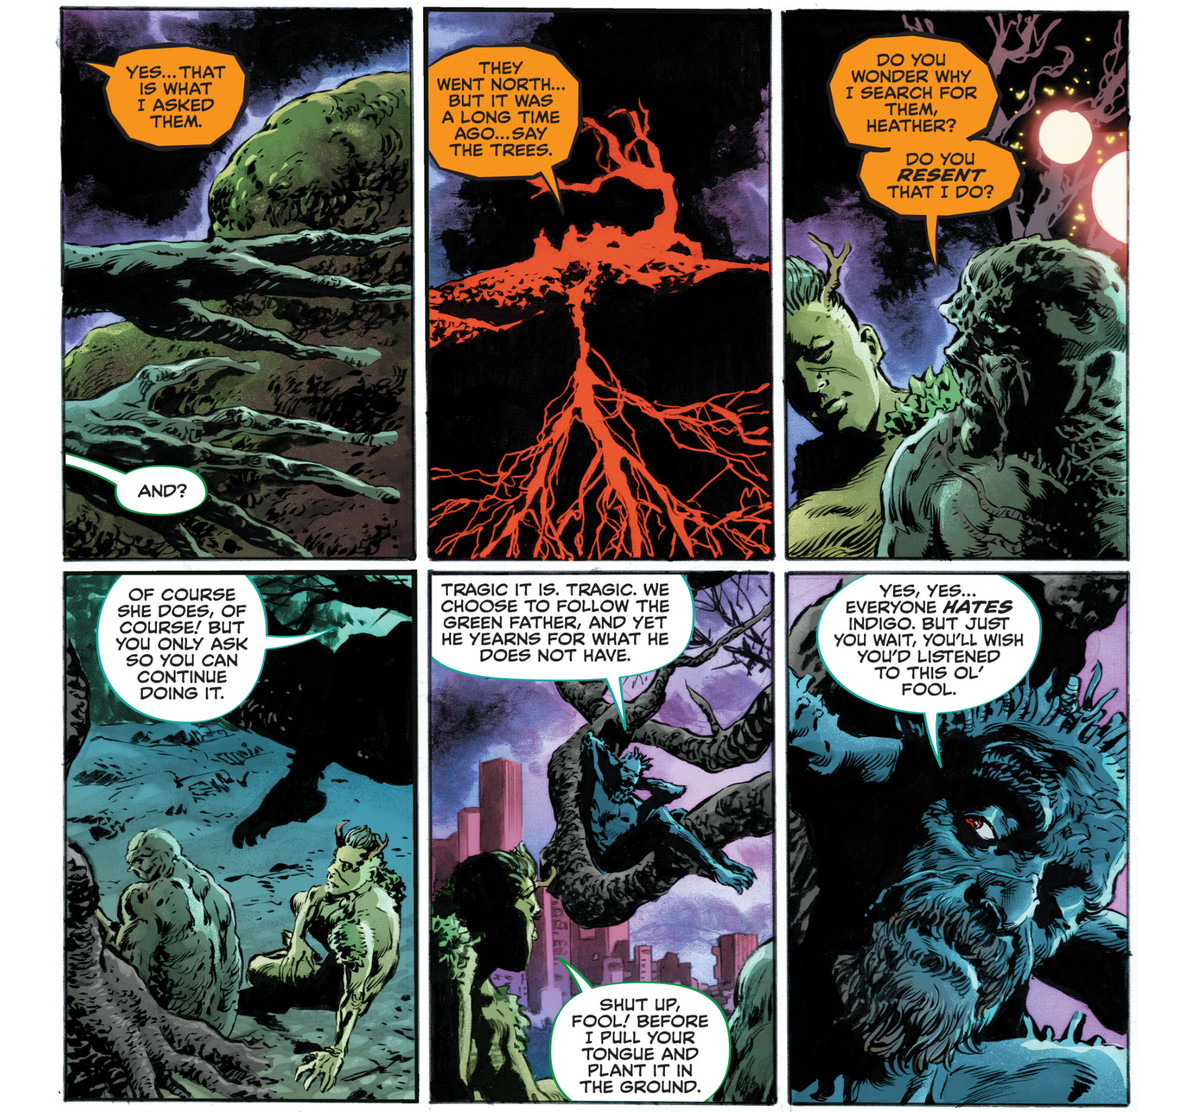 “Do you wonder why I search for [humanity], Heather? Do you resent that I do?” Swamp Thing asks one of his plant children. “OF course she does. Of course! But you only ask so you can continue doing it,” replies another of his plant children, in Future State: Swamp Thing #1, DC Comics (2021). 